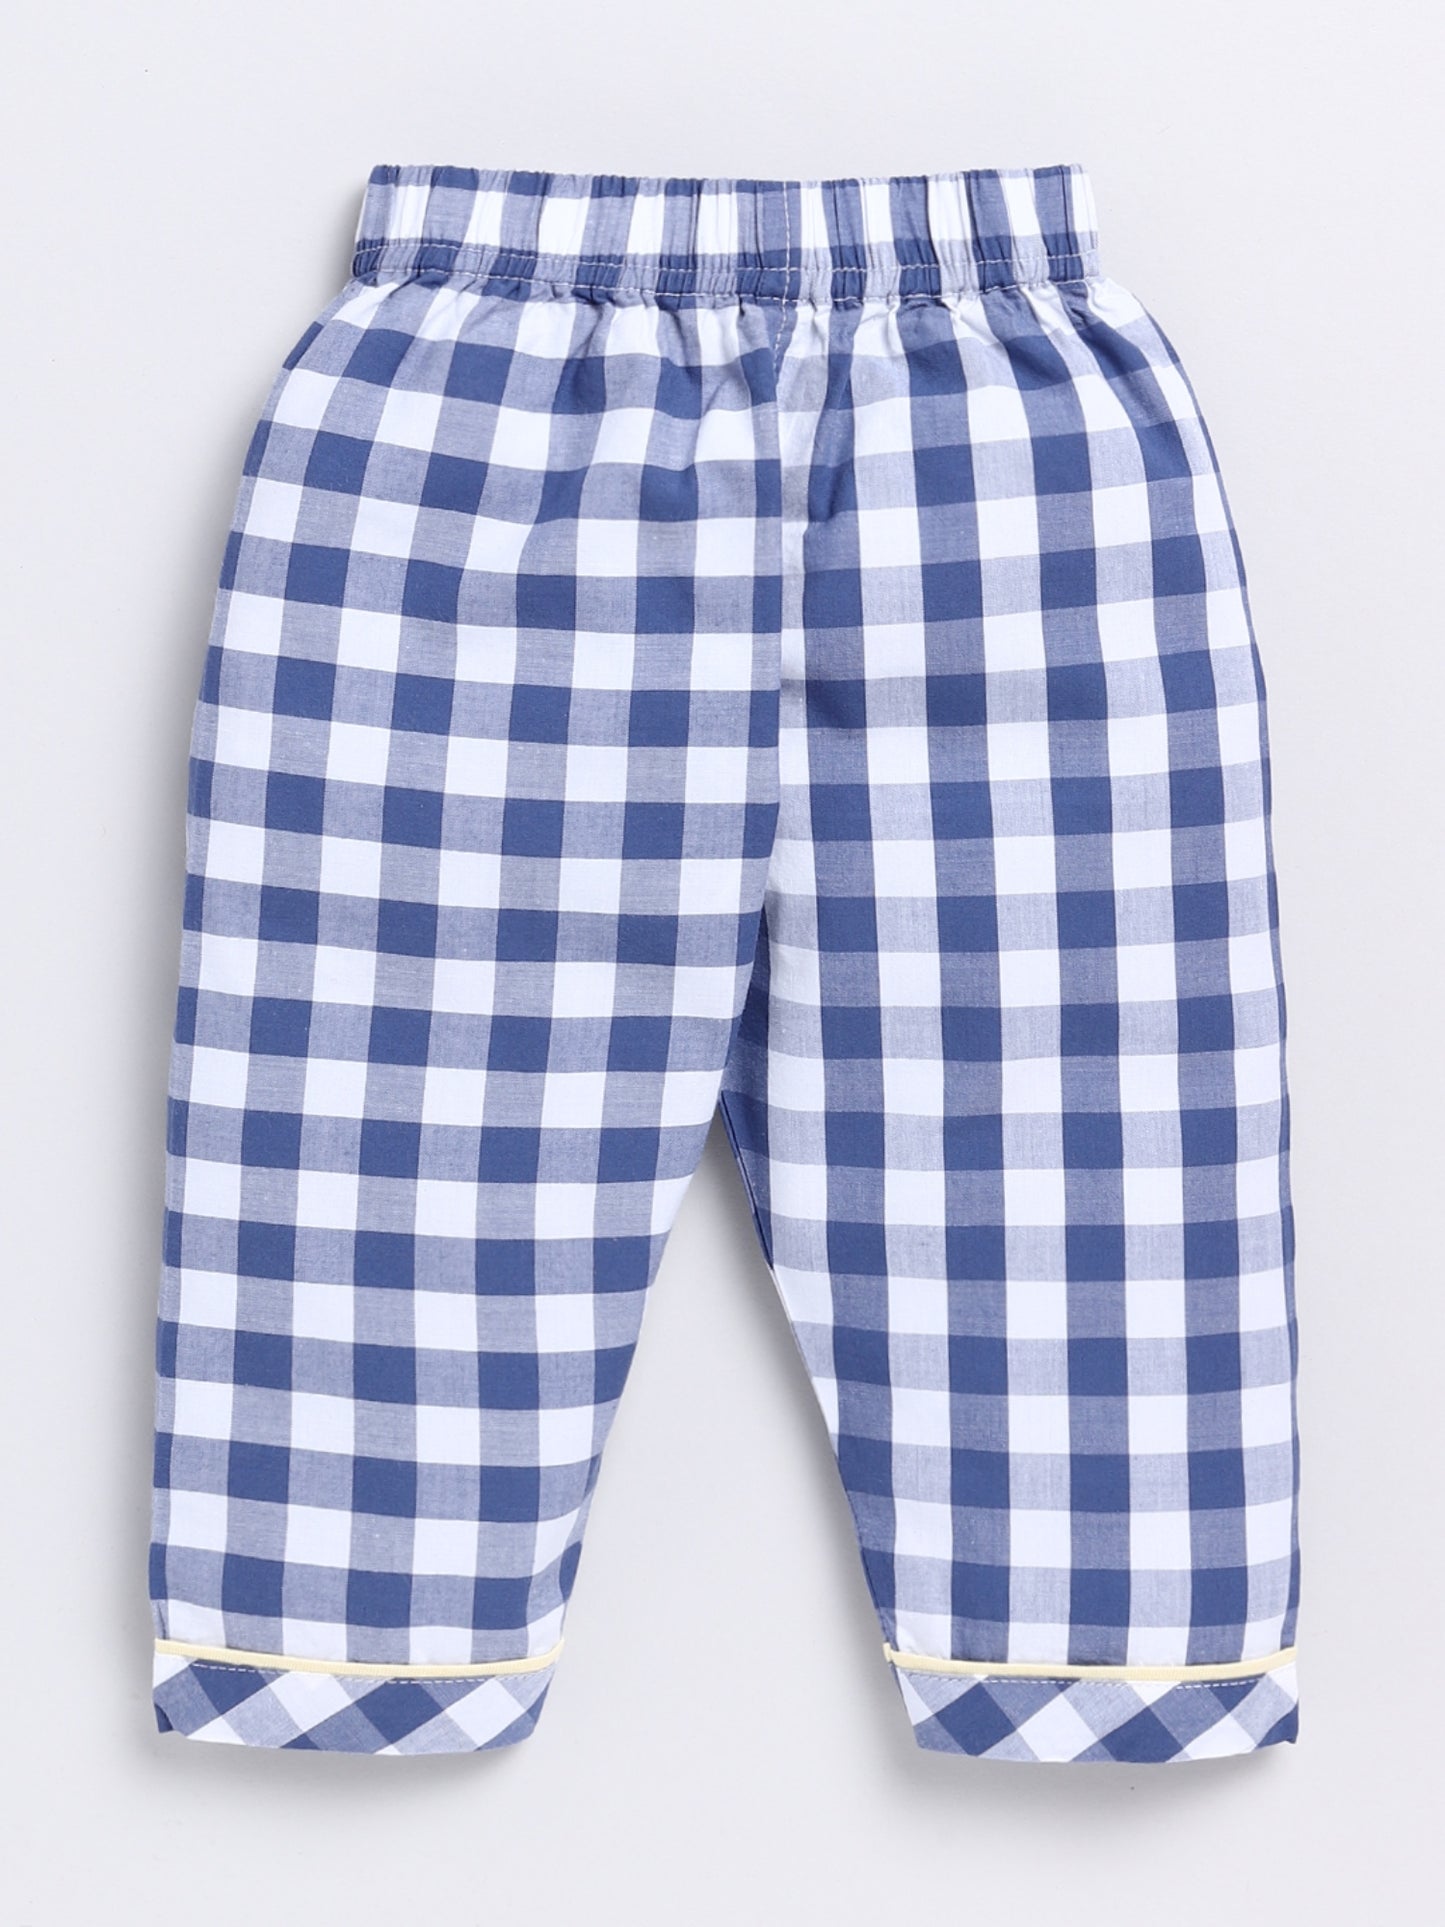 Blue "Cuter Version of Dad" Night Suit